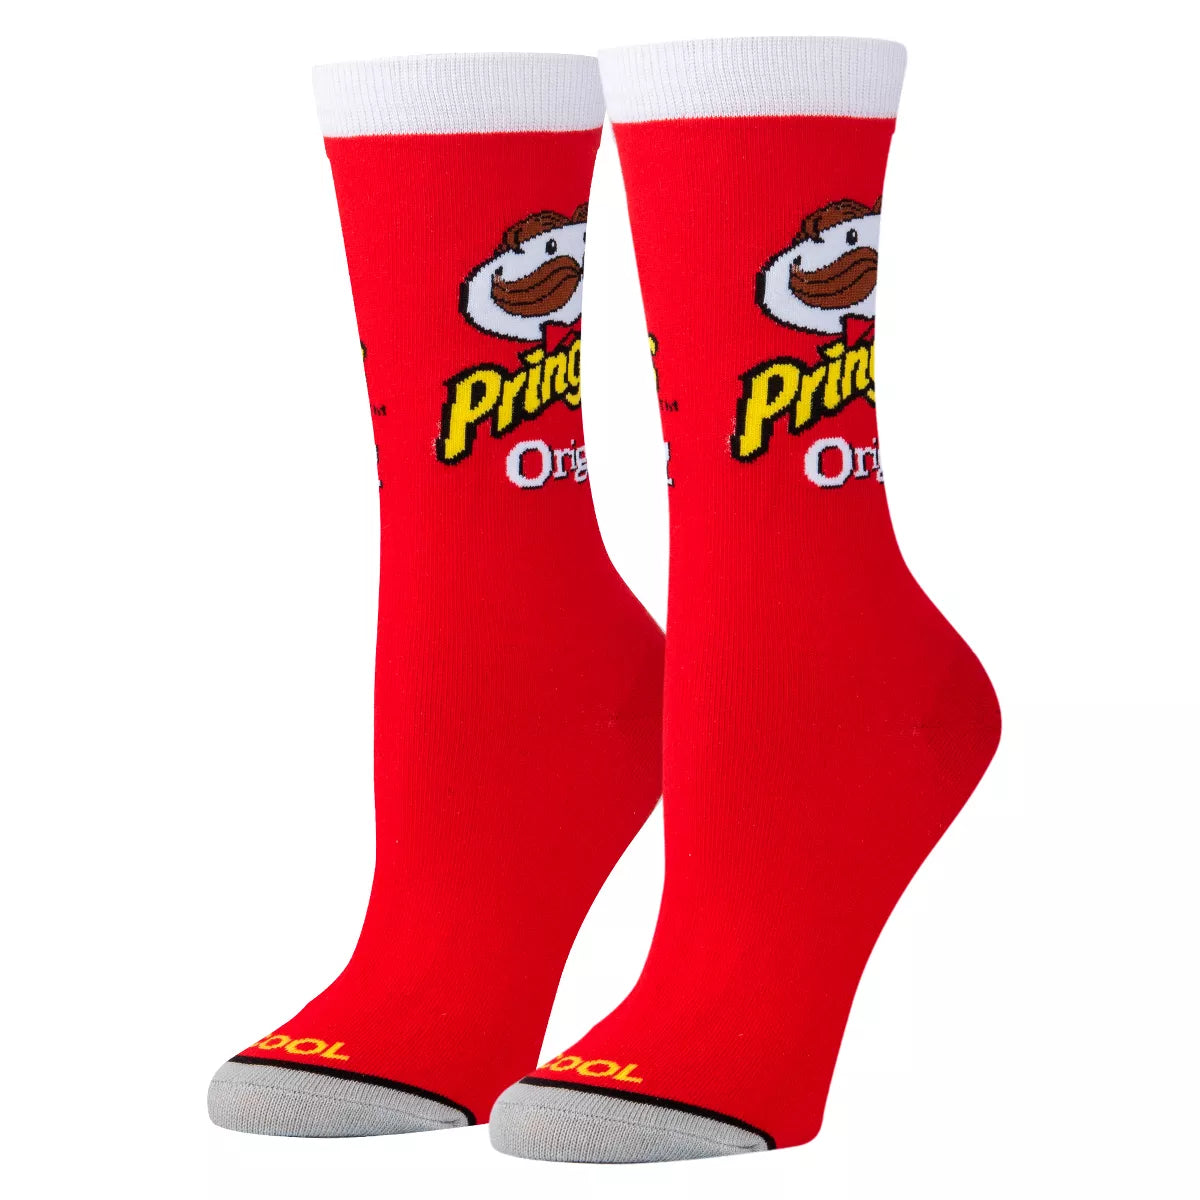 pringles can crew socks displayed on a white background